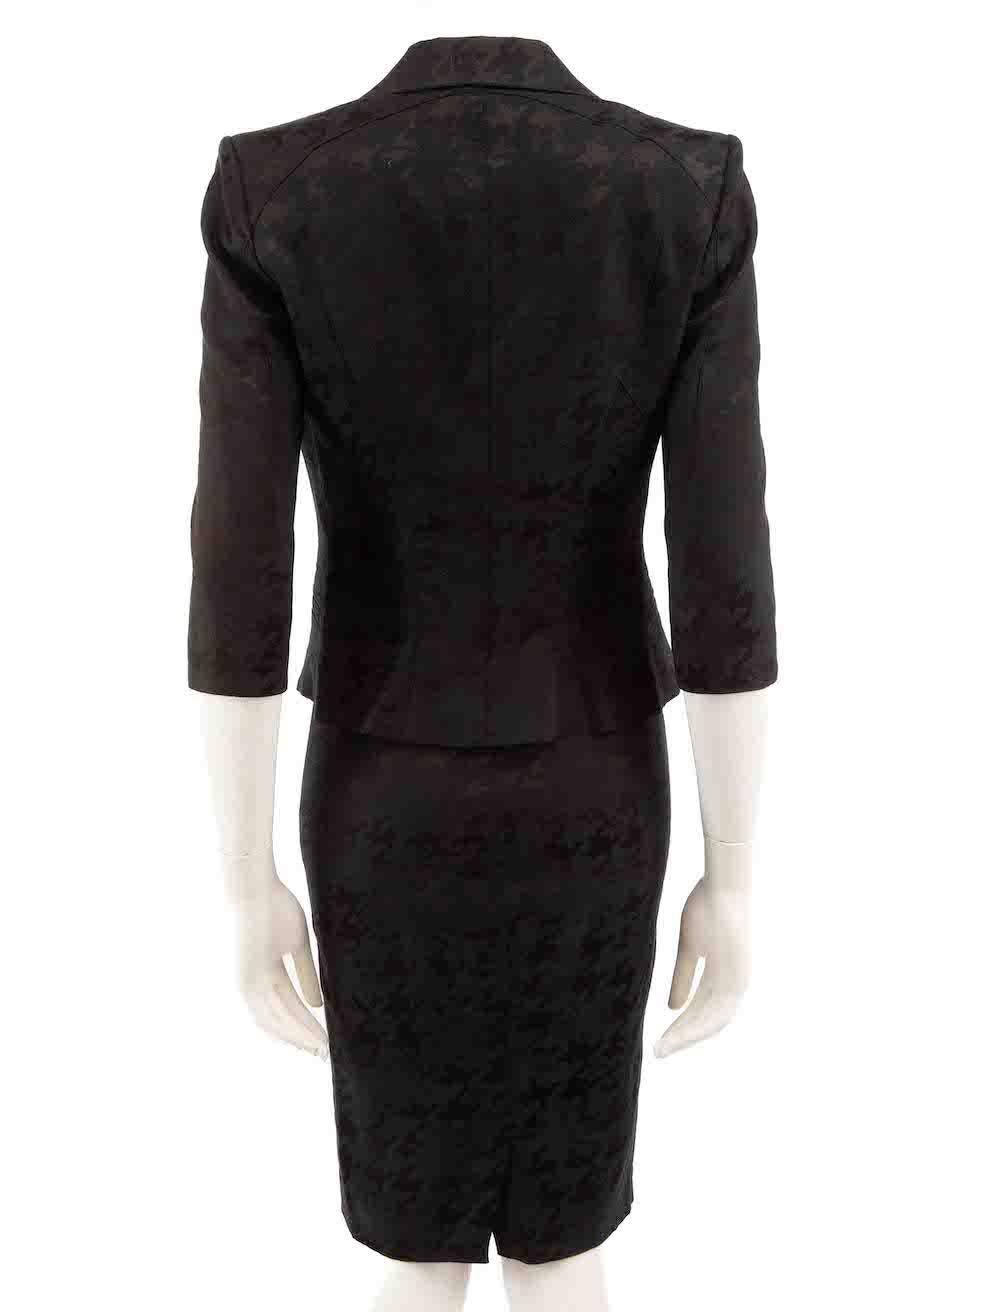 Roberto Cavalli Just Cavalli Black Houndstooth Skirt Suit Size S In Good Condition For Sale In London, GB